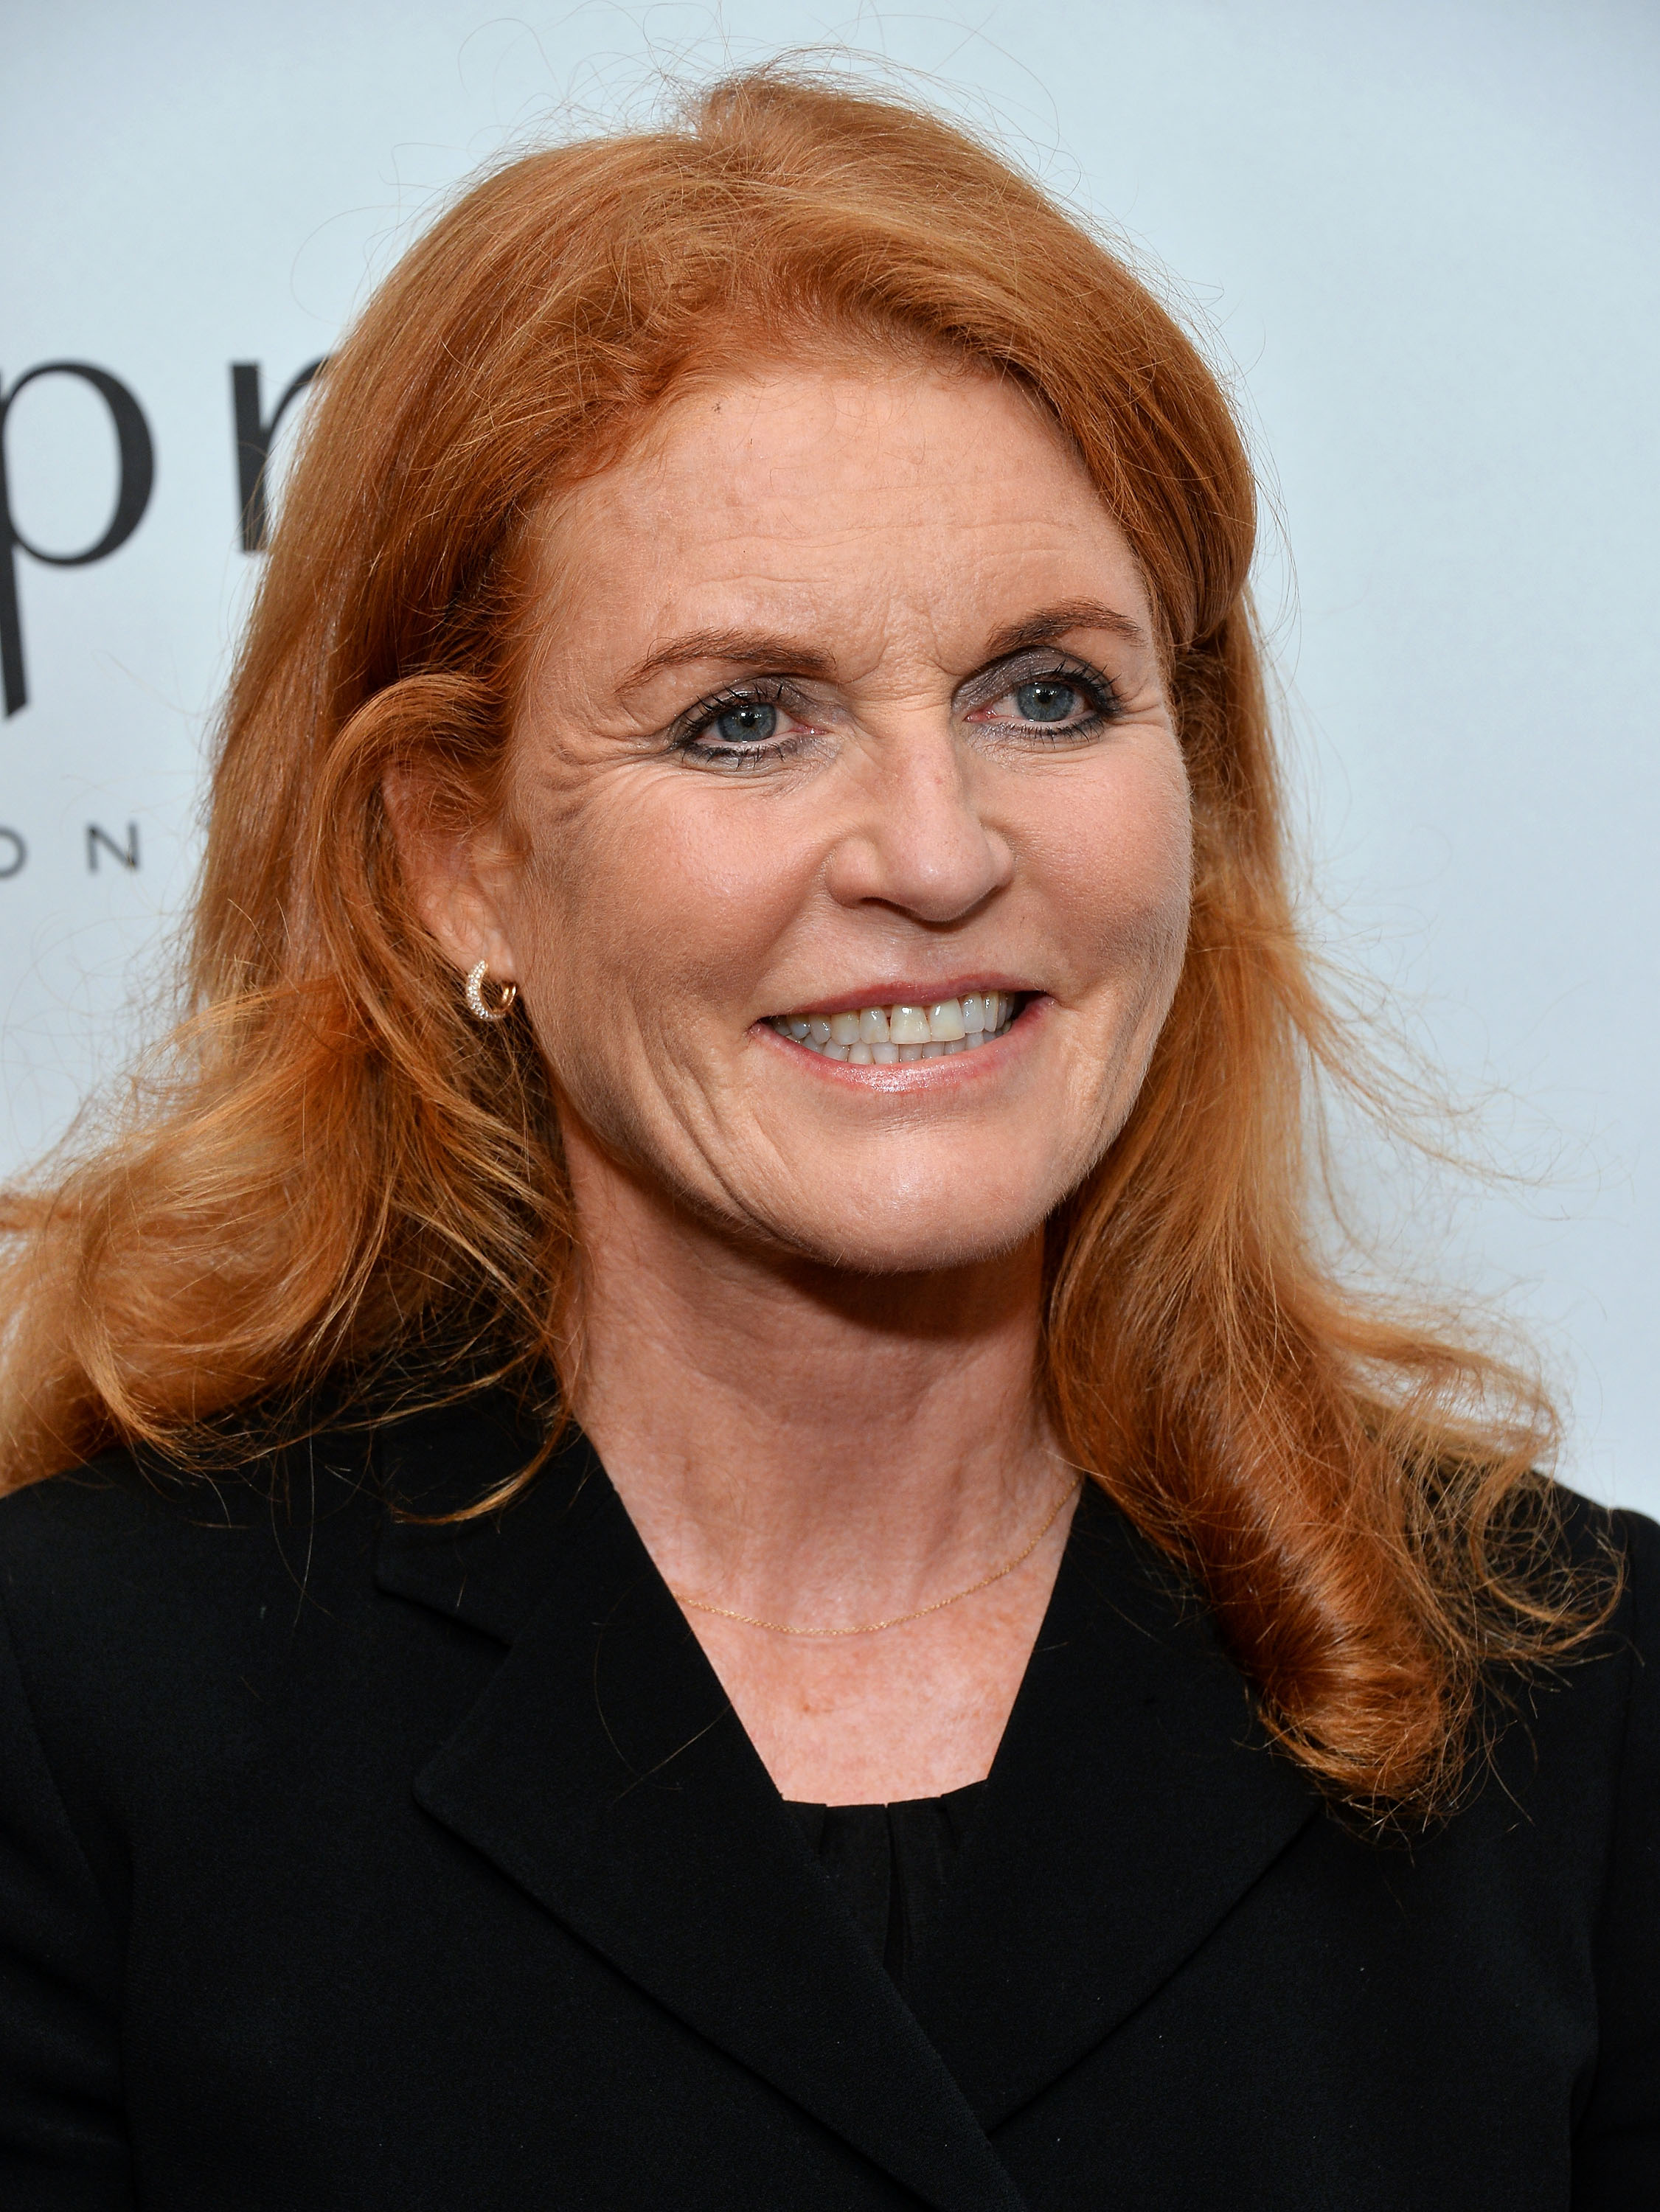 The Duchess of York, Sarah Ferguson, at The British American Business Council Los Angeles 54th Annual Christmas Luncheon on December 13, 2013, in Santa Monica, California | Source: Getty Images